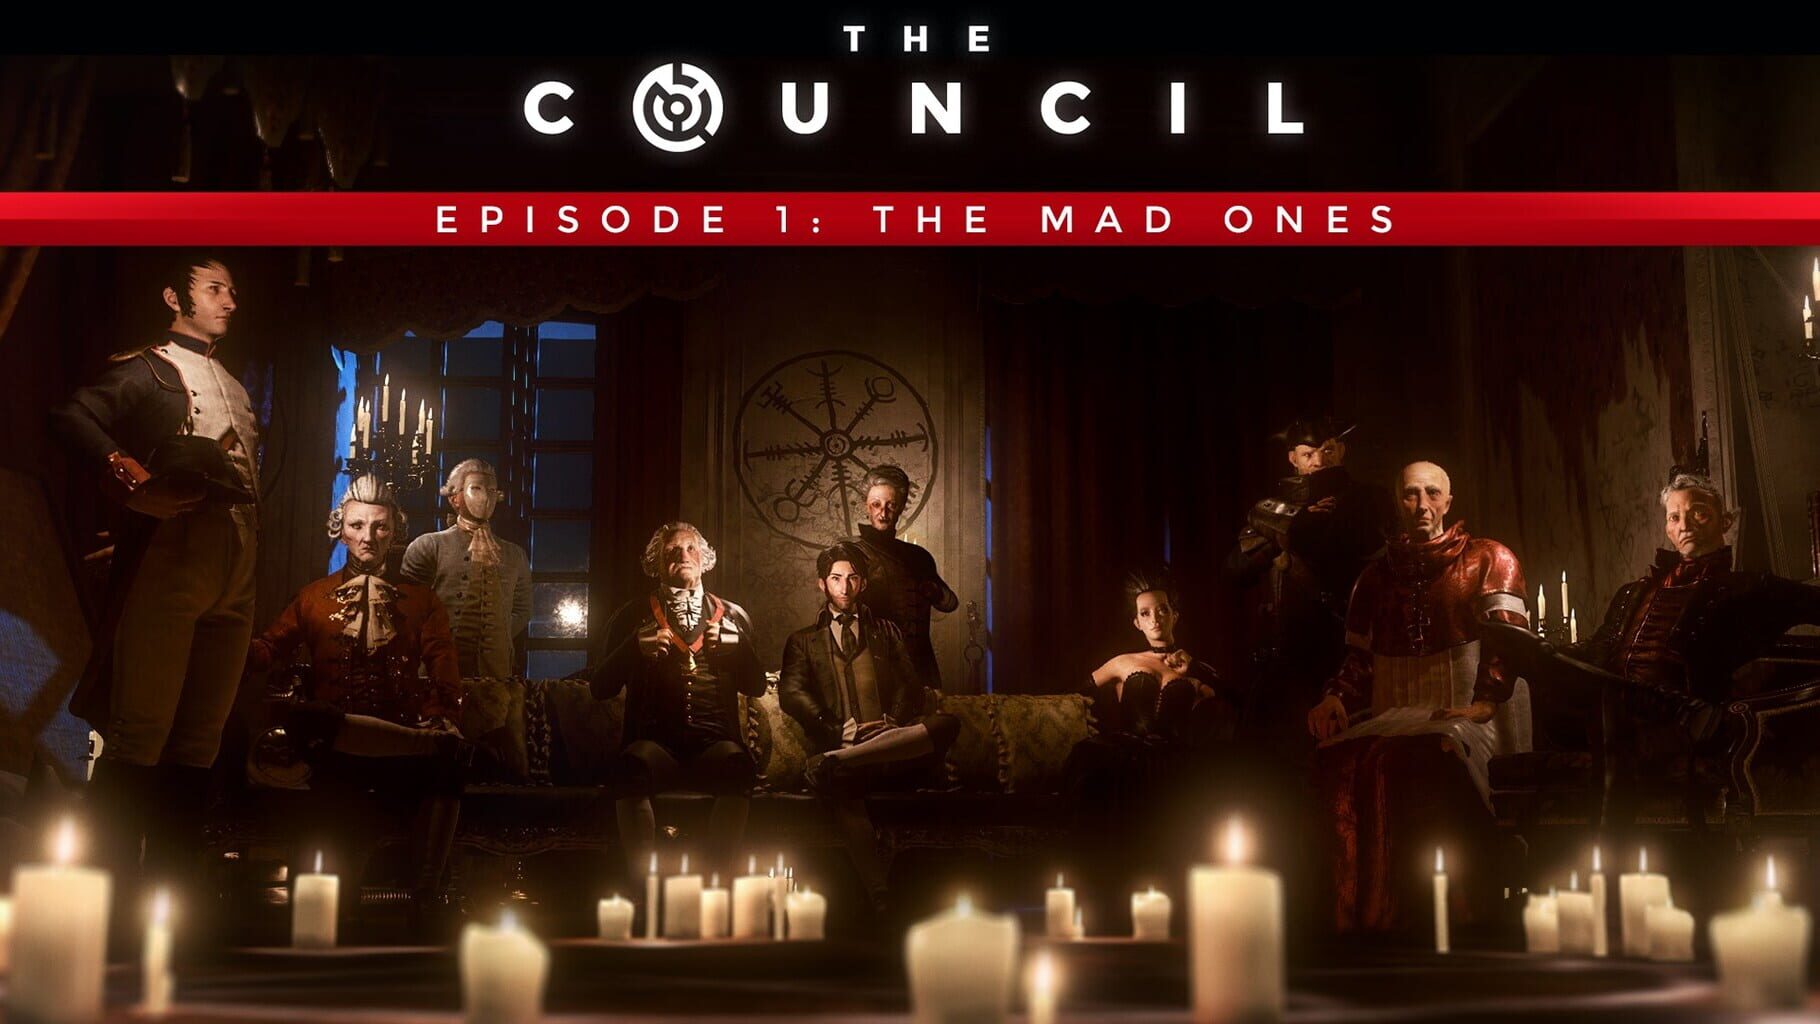 Artwork for The Council: Episode 1 - The Mad Ones